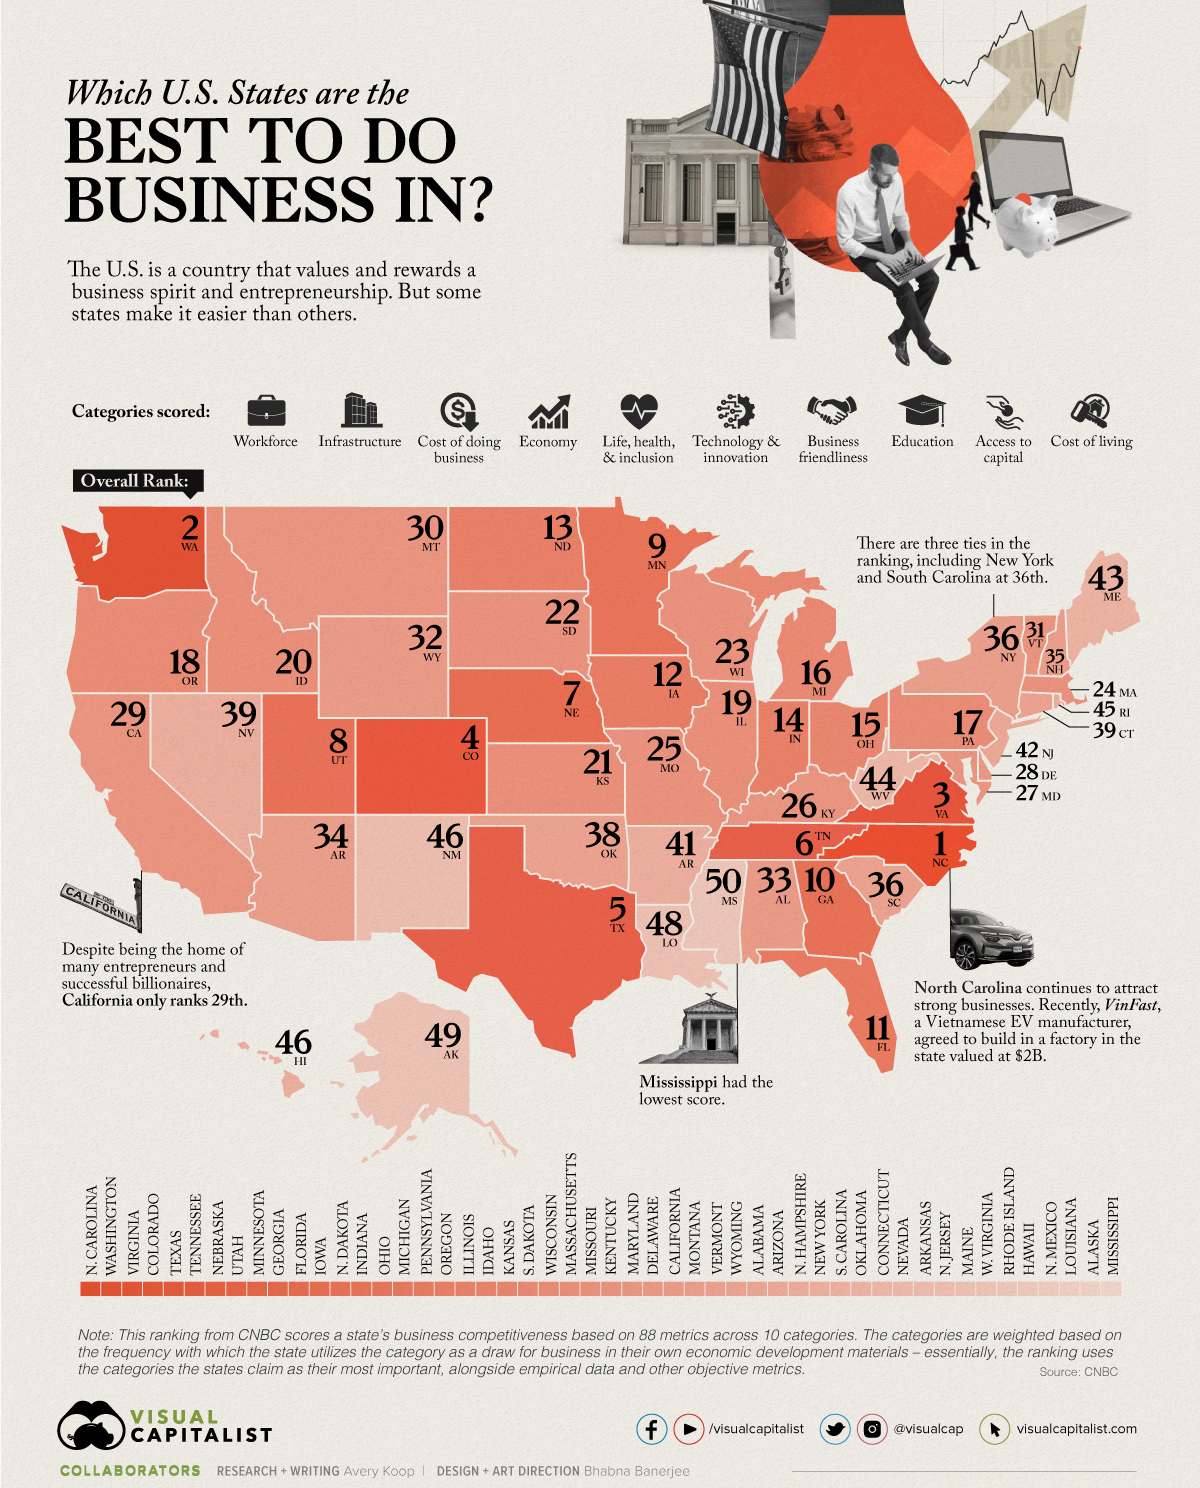 Ranked: The best states to do business in